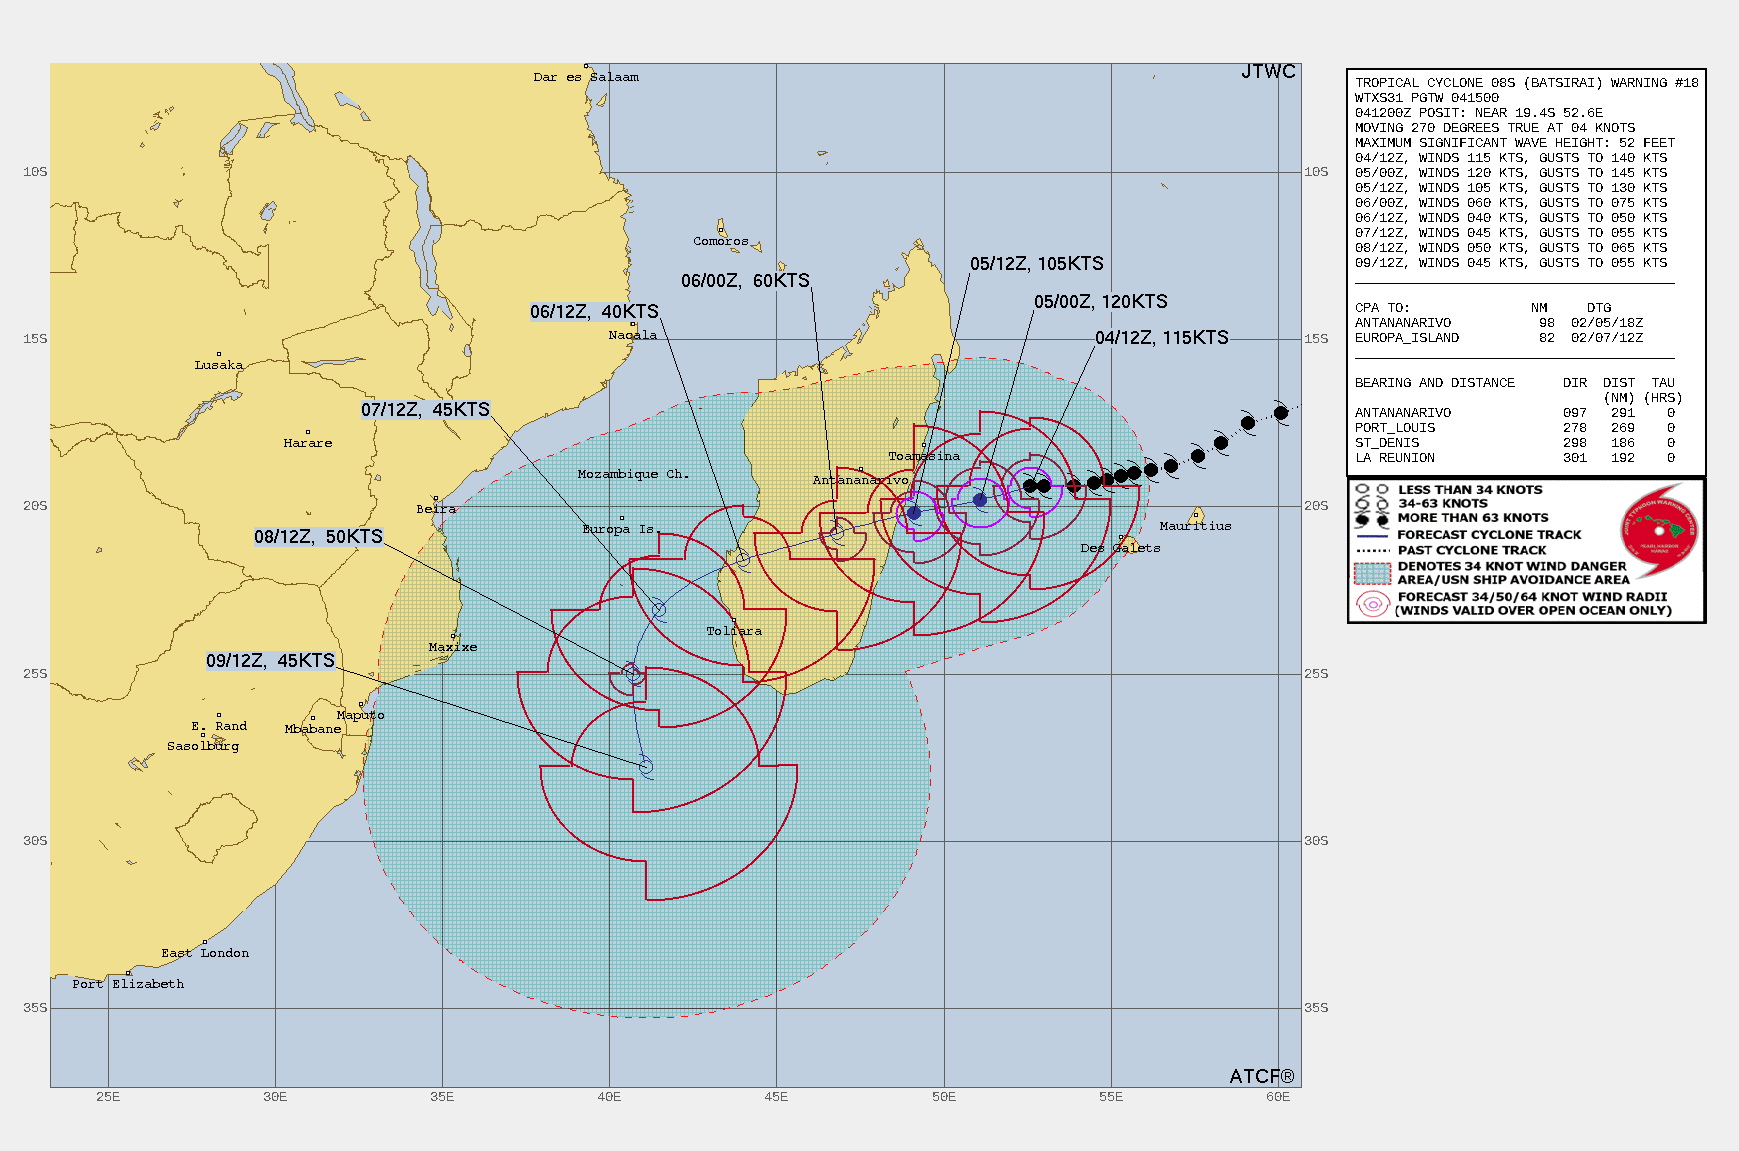 FORECAST REASONING.  SIGNIFICANT FORECAST CHANGES: THERE ARE NO SIGNIFICANT CHANGES TO THE FORECAST FROM THE PREVIOUS WARNING.  FORECAST DISCUSSION: TC BATSIRAI WILL CONTINUE ON ITS CURRENT TRACK UNDER THE STEERING INFLUENCE OF THE STR, MAKING LANDFALL OVER CENTRAL MADAGASCAR JUST AFTER 24H, CROSS THE ISLAND, AND EXIT INTO THE MOZAMBIQUE CHANNEL SHORTLY AFTER 48H. AFTERWARD, IT WILL ROUND THE WESTERN EDGE OF THE SUBTROPICAL RIDGE (STR) AND TRACK SOUTHWARD. THE INITIAL FAVORABLE ENVIRONMENT WILL FUEL SLIGHT INTENSIFICATION TO  120KTS/CAT 4 US BY 12H; AFTERWARD, INTERACTION WITH MADAGASCAR WILL SLOWLY  THEN RAPIDLY ERODE THE SYSTEM DOWN TO 40KTS PRIOR TO ITS EXIT INTO  THE CHANNEL. THE WARM SST IN THE CHANNEL WILL RE-INTENSIFY TC 08S TO  50KTS BY 96H. AFTERWARD, REDUCED UPPER LEVEL OUTFLOW AND  DECREASING SST WILL BEGIN TO WEAKEN IT, DOWN TO 45KTS BY 120H.